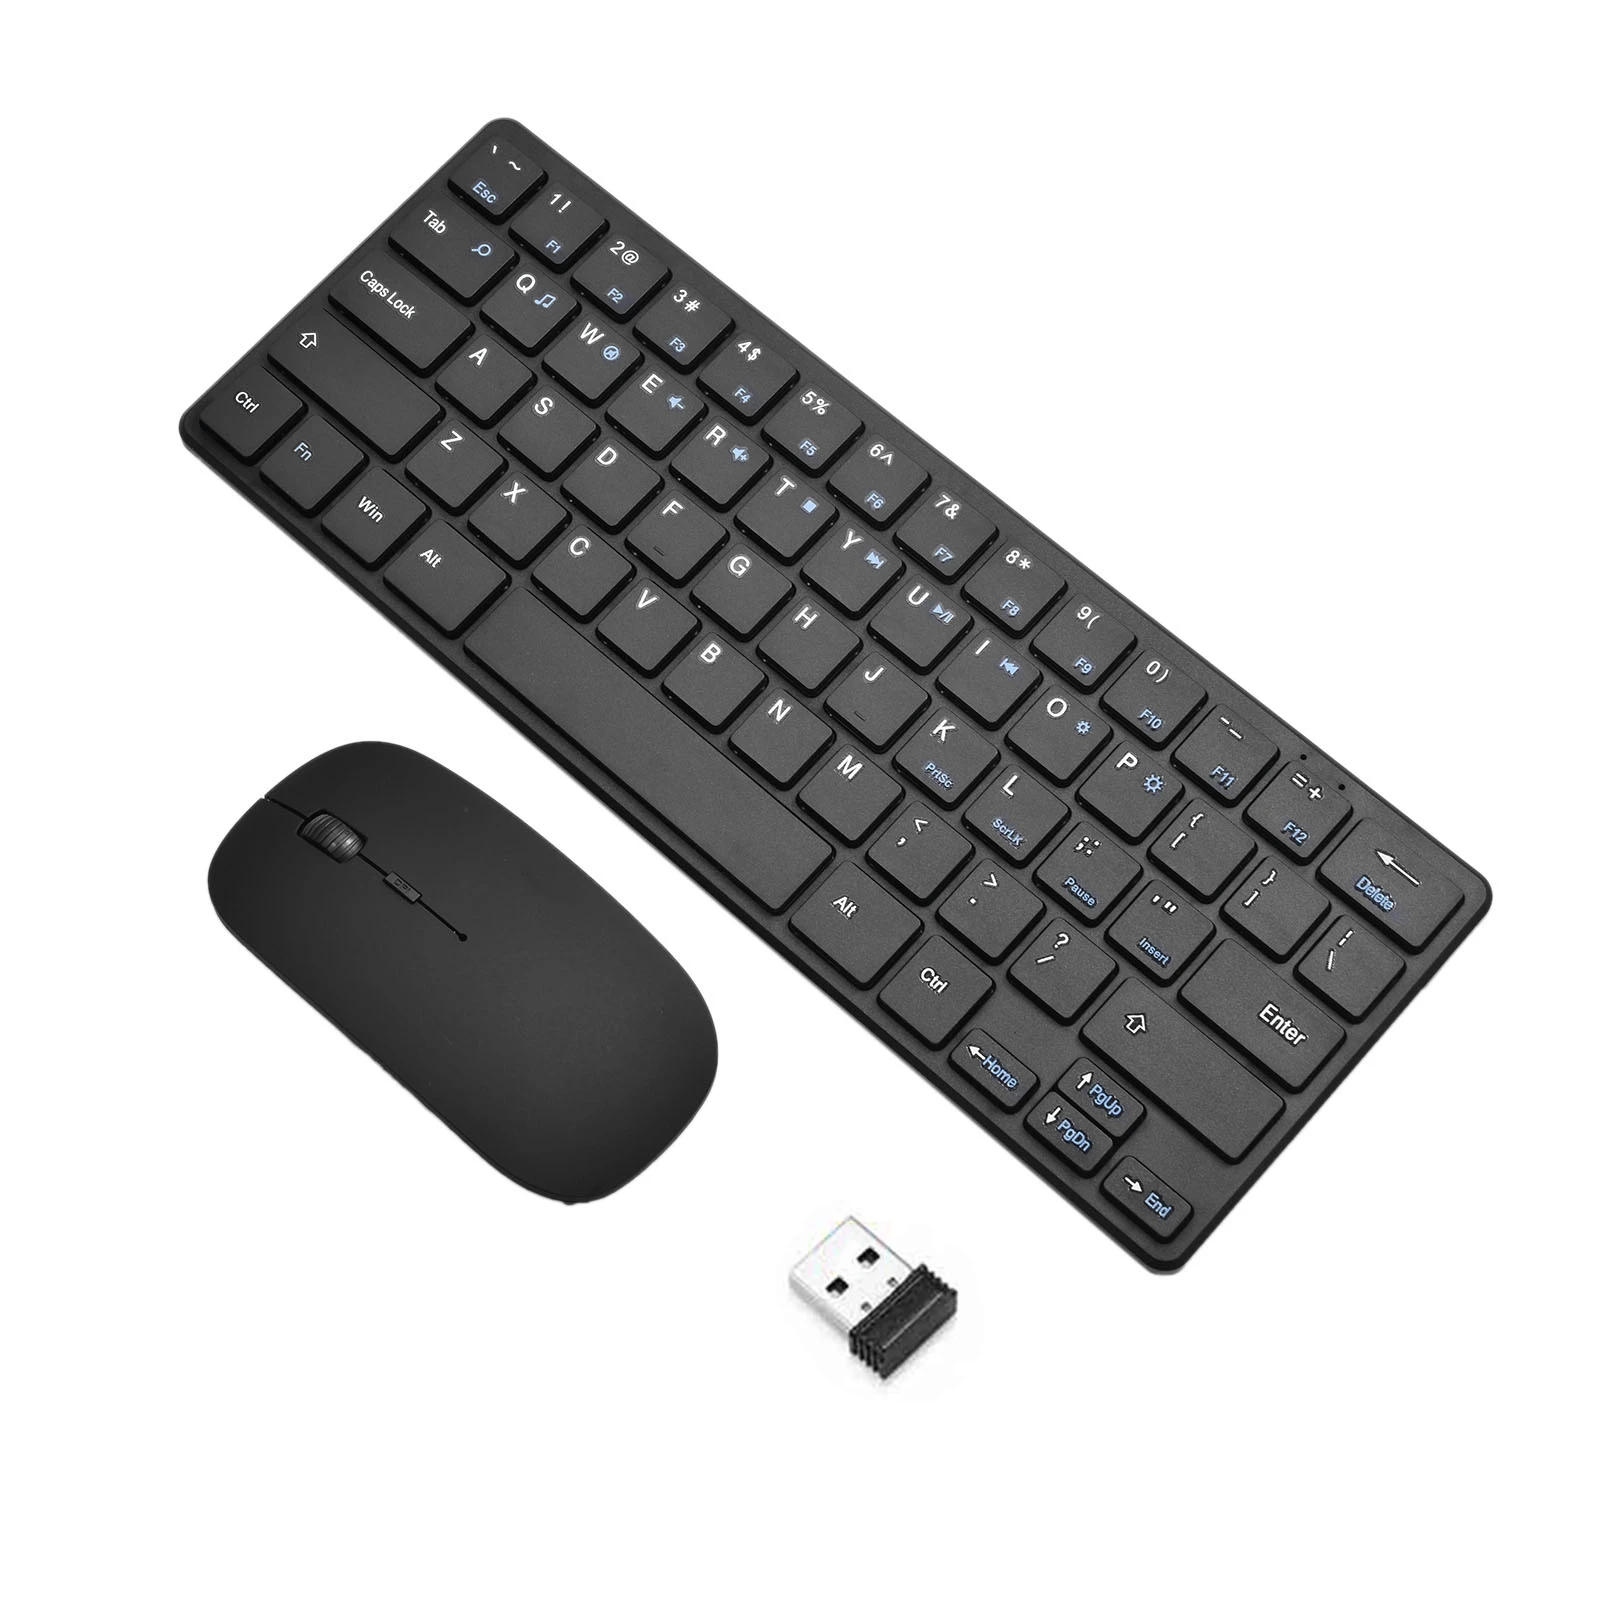 Wireless Keyboard and Mouse Combo 96 Keys Gamming Keyboard 3 Speed 4 Button Mouse for Notebook PC Gamer Micro Receiver 